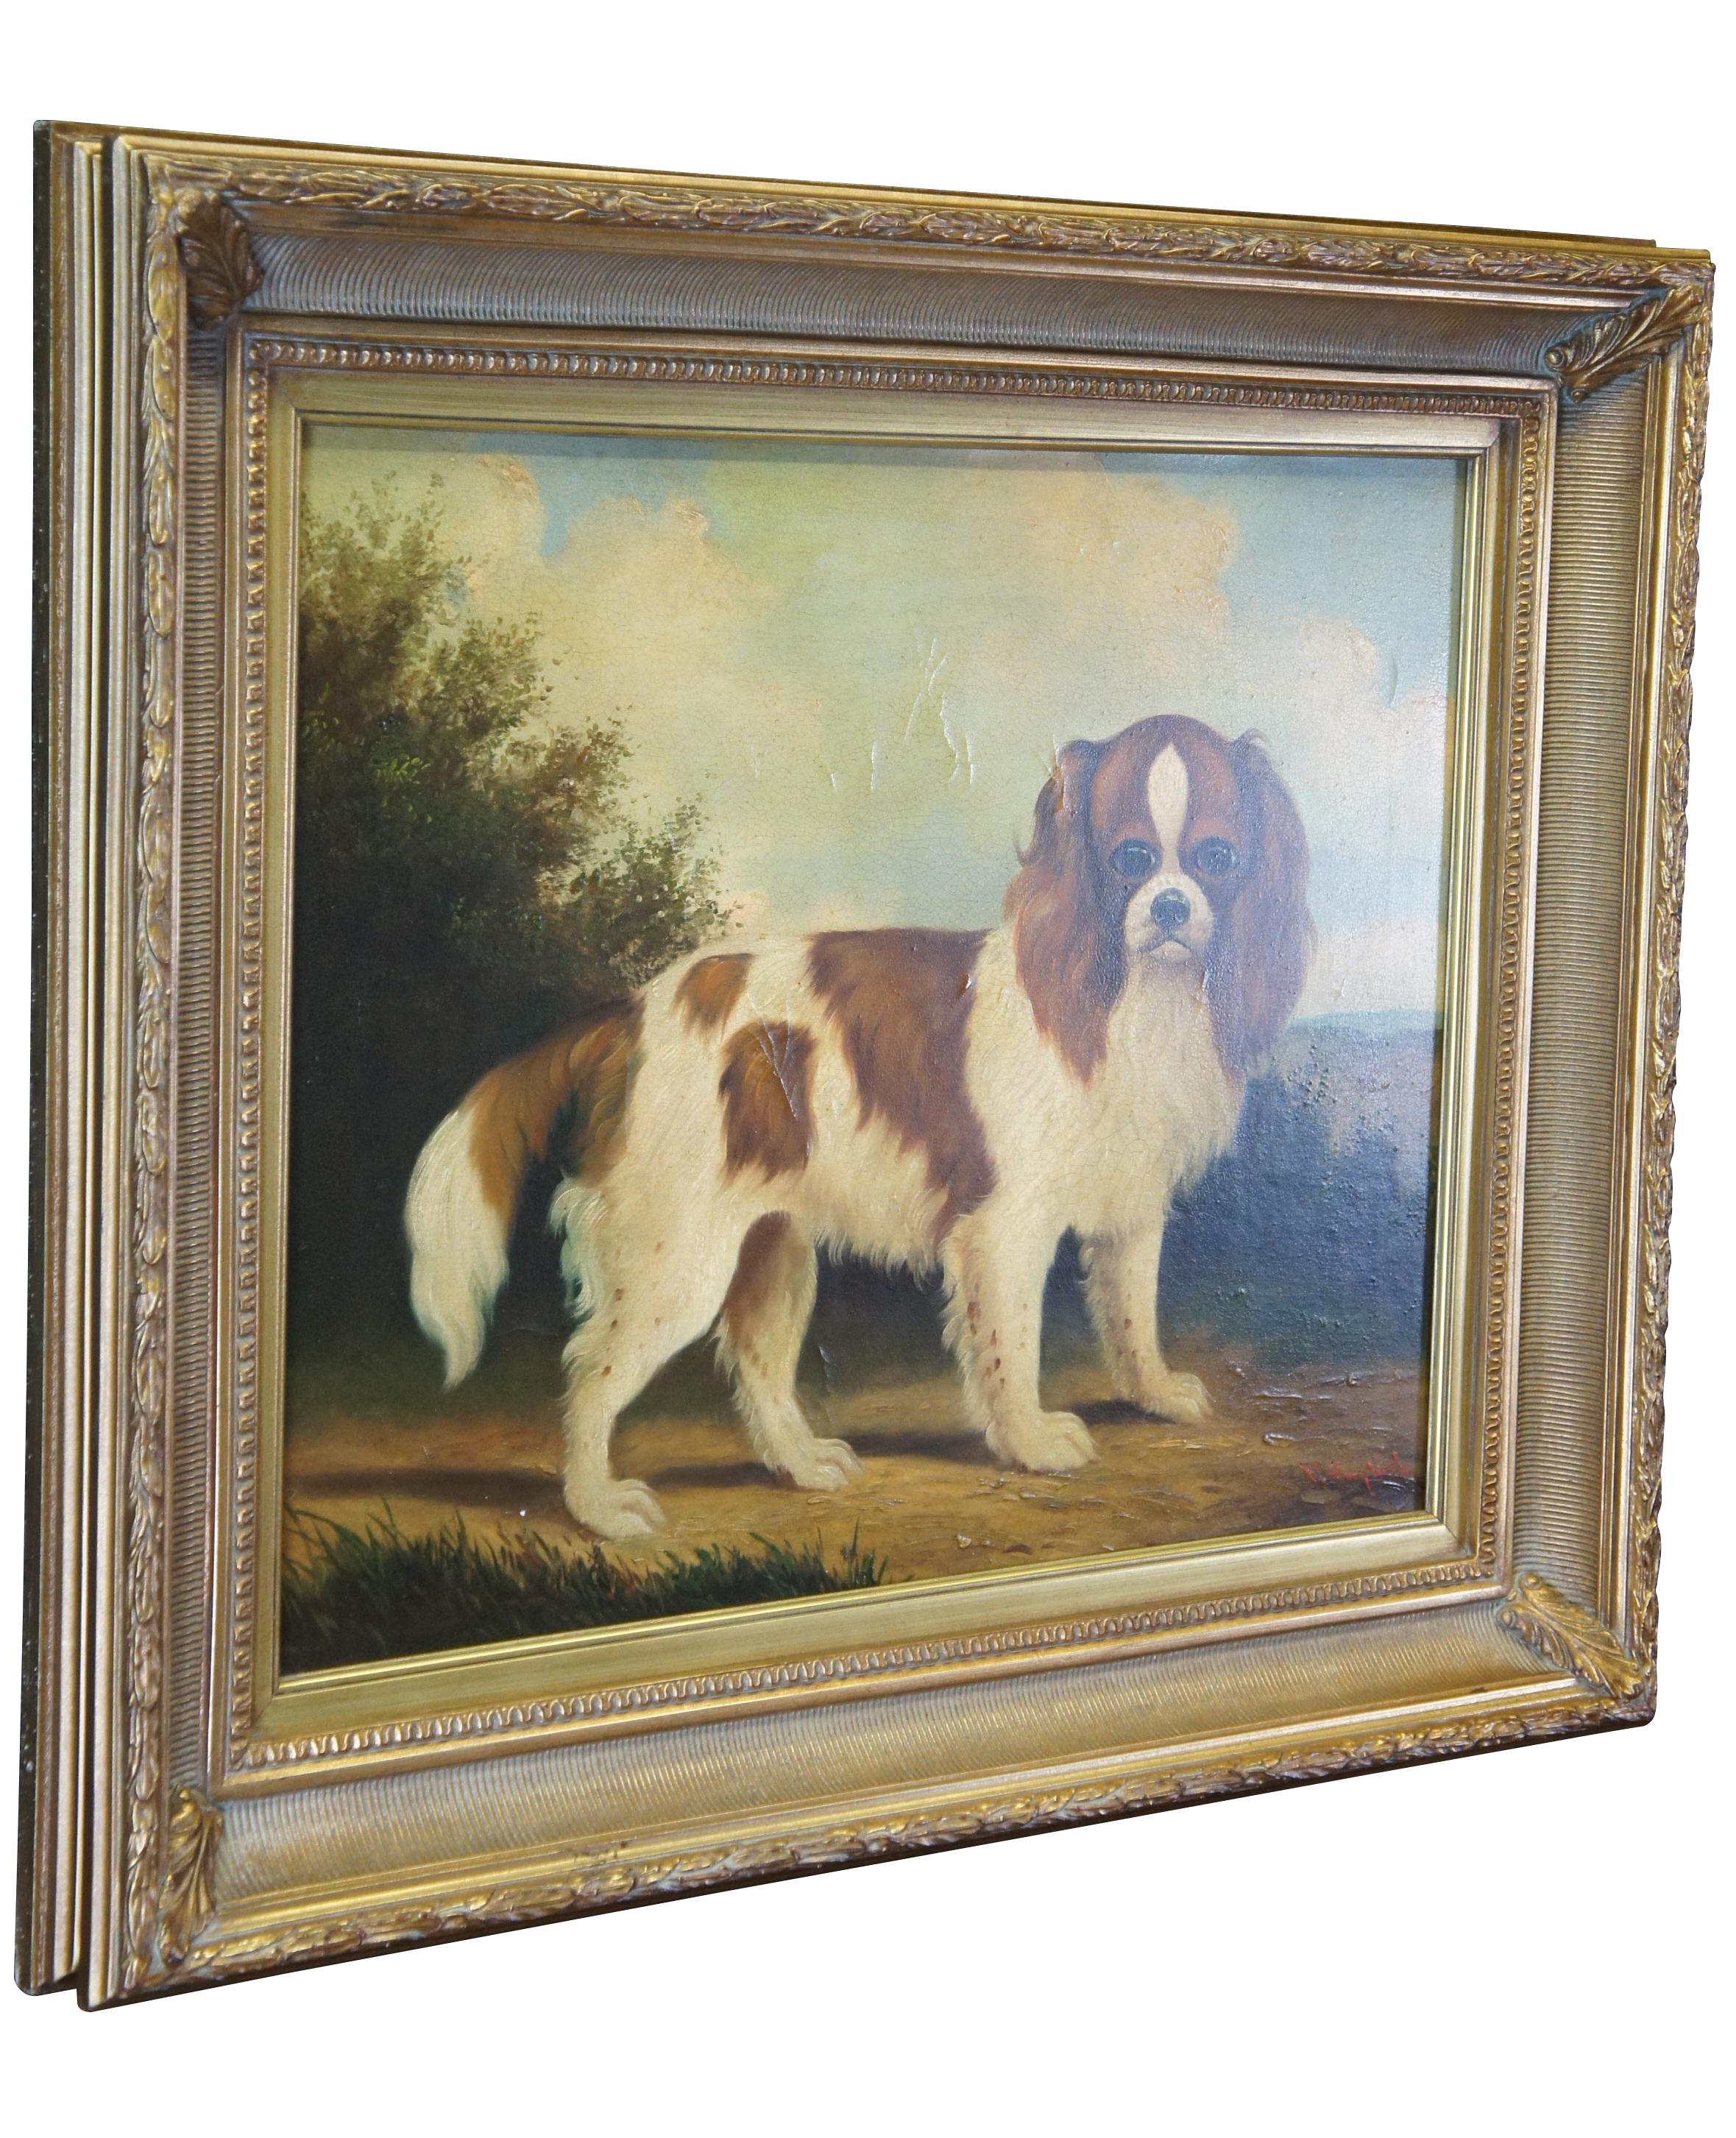 Late 20th century oil painting by Paul English.  Features a brown and white cavalier posing on a trail landscape.  The canvas is signed lower right and framed in gold.  Paul English (contemporary) is active/lives in United Kingdom.

Dimensions:
28